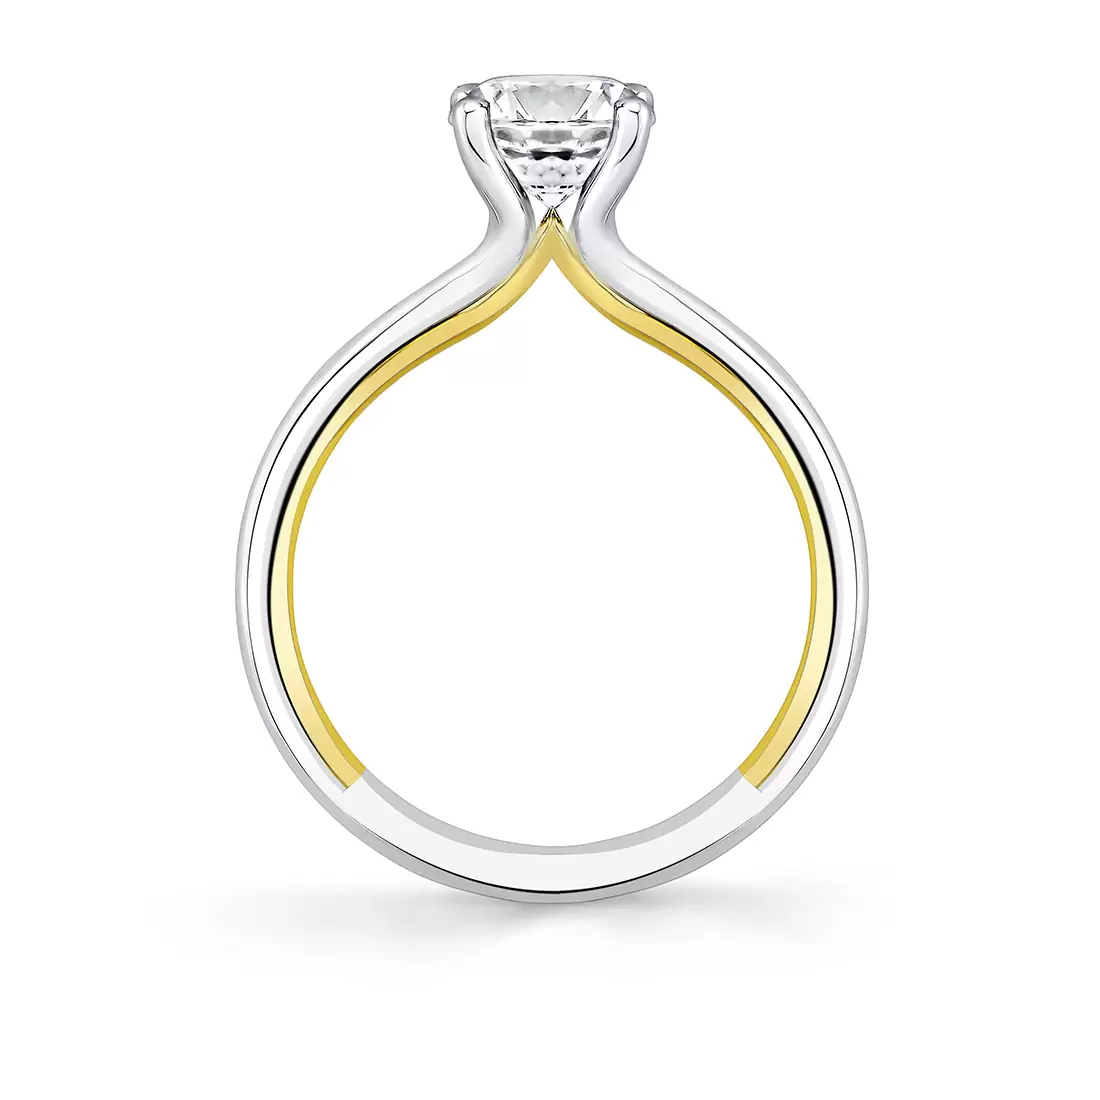 Iconelle solitaire two tone engagement ring